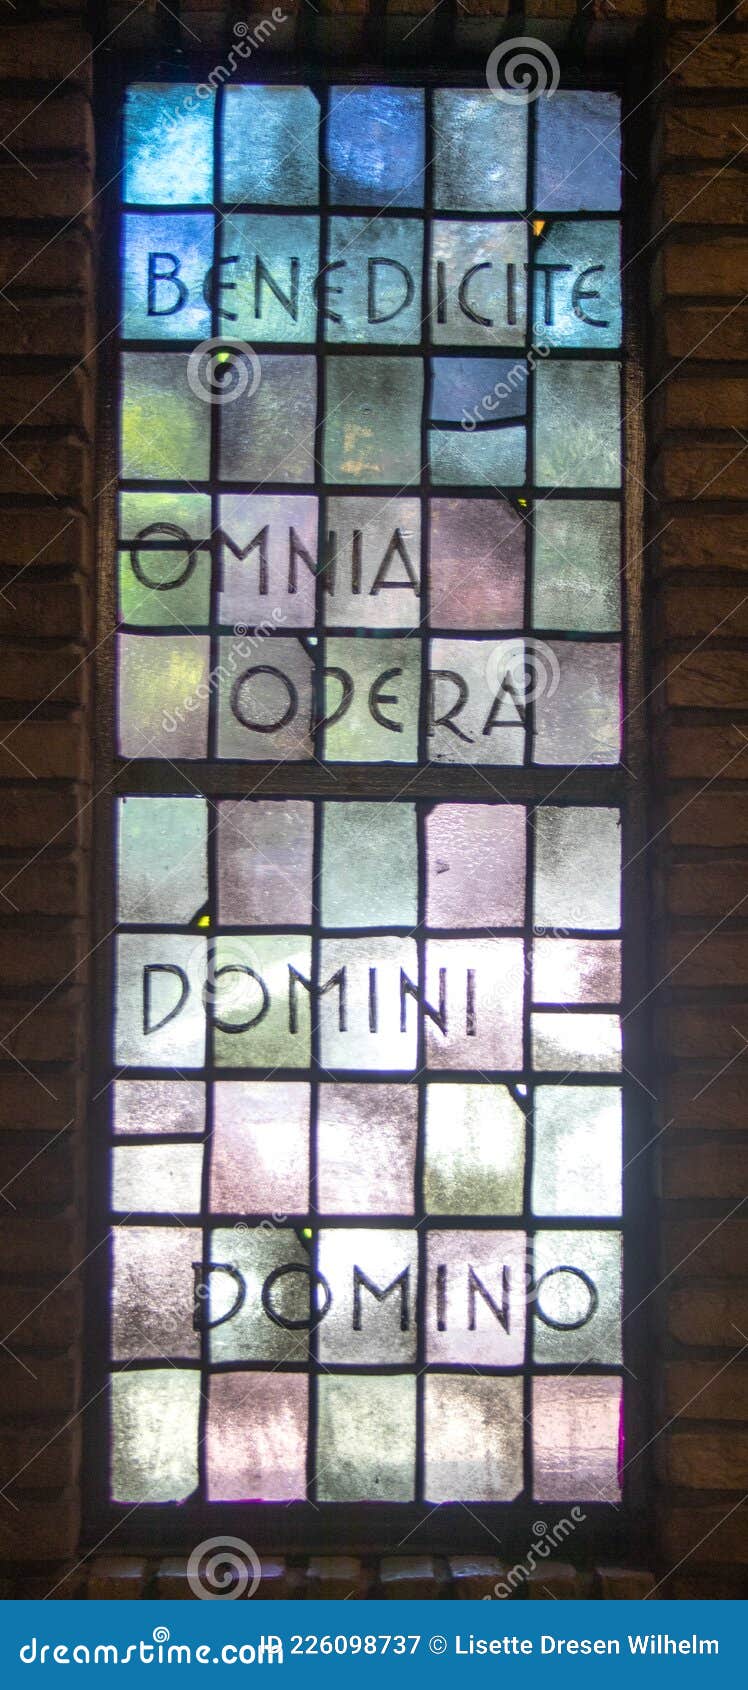 stained glass window with the text: benedicite omnia opera domini domino